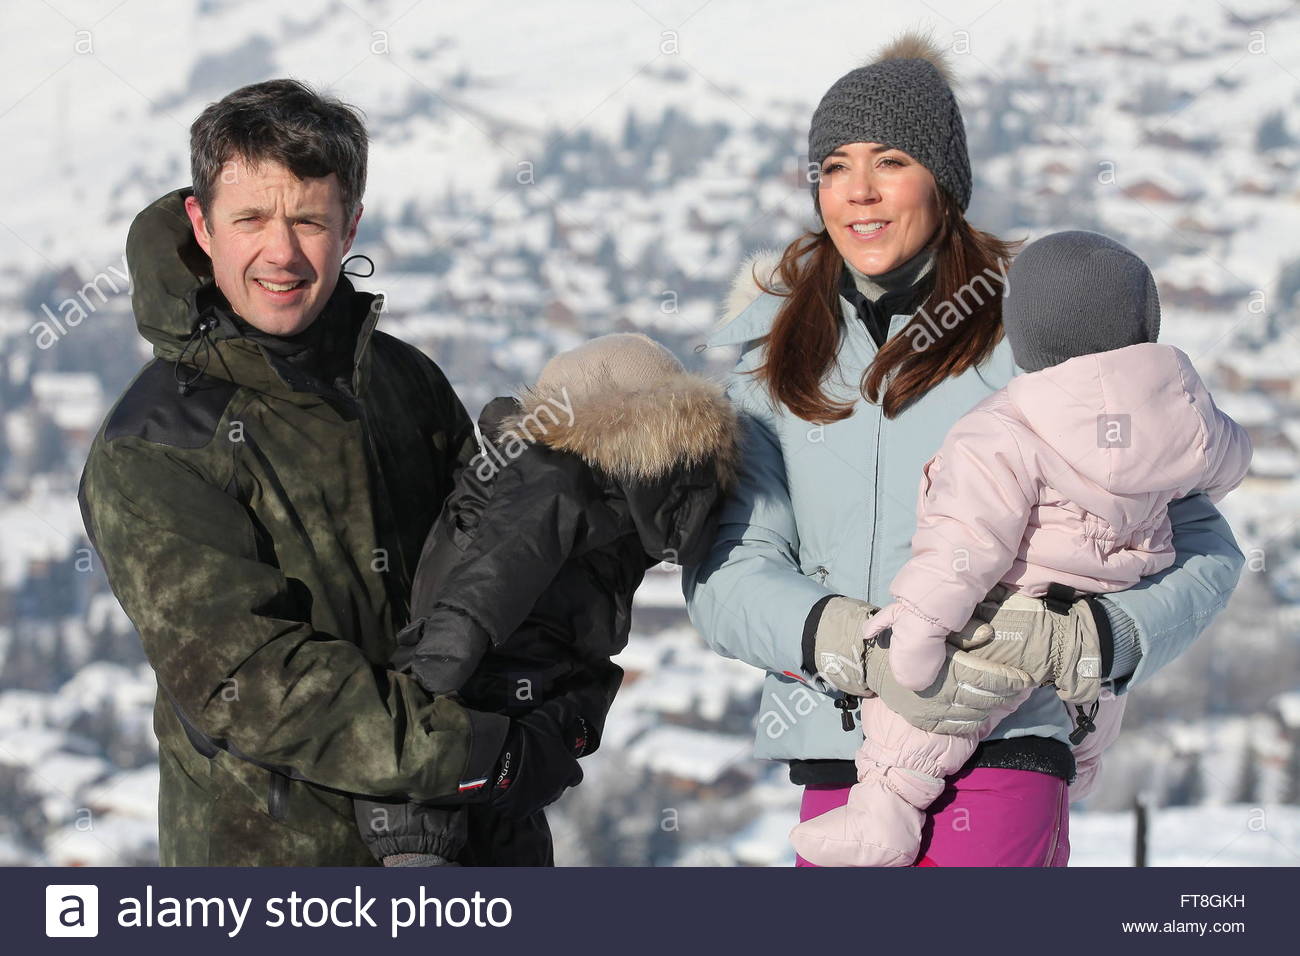 danish-crown-prince-frederik-l-his-wife-crown-princess-mary-r-and-FT8GKH.jpg